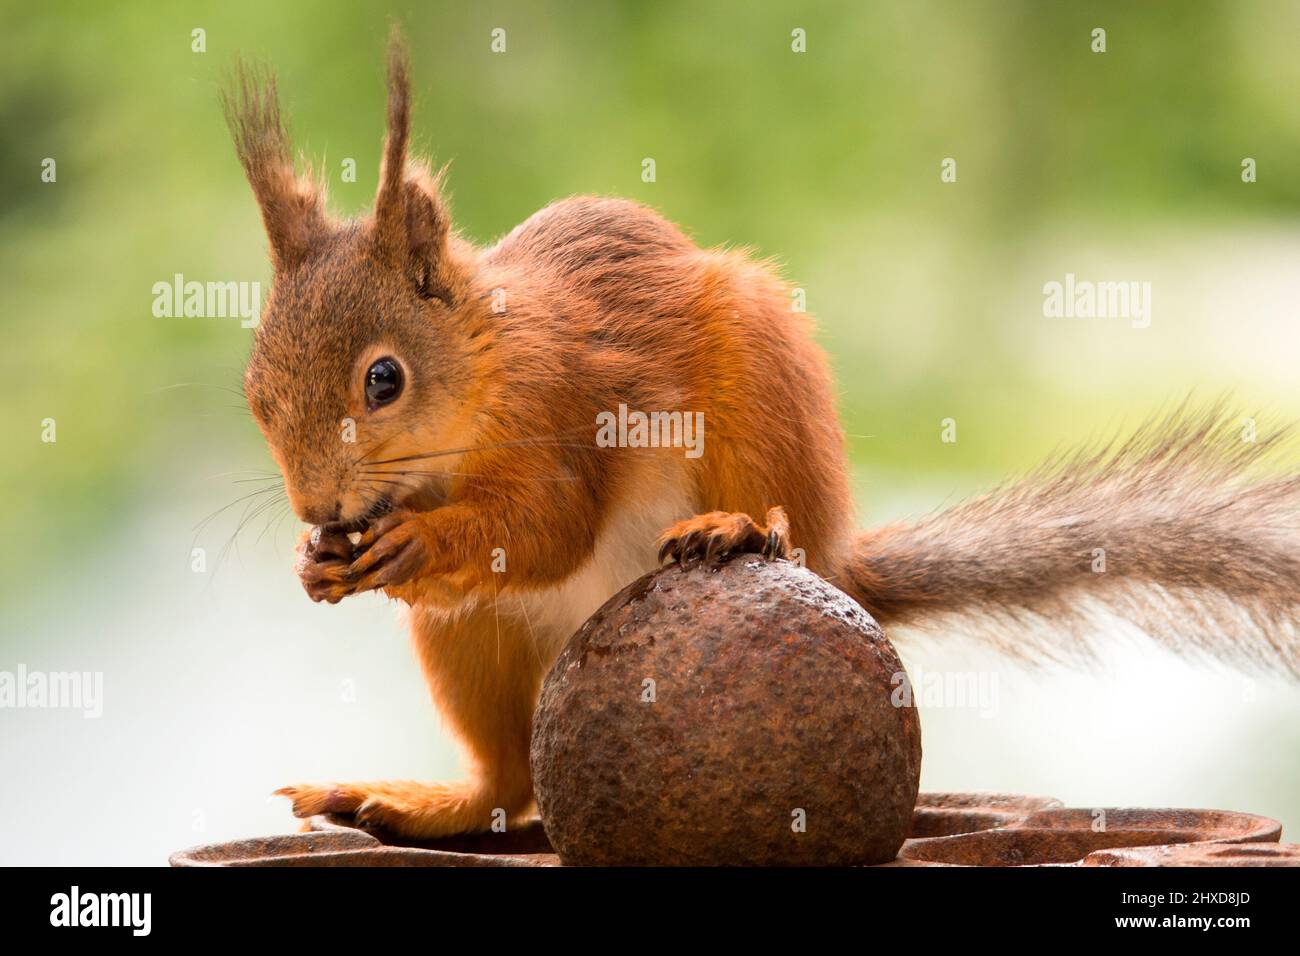 red squirrel standing on iron ball Stock Photo